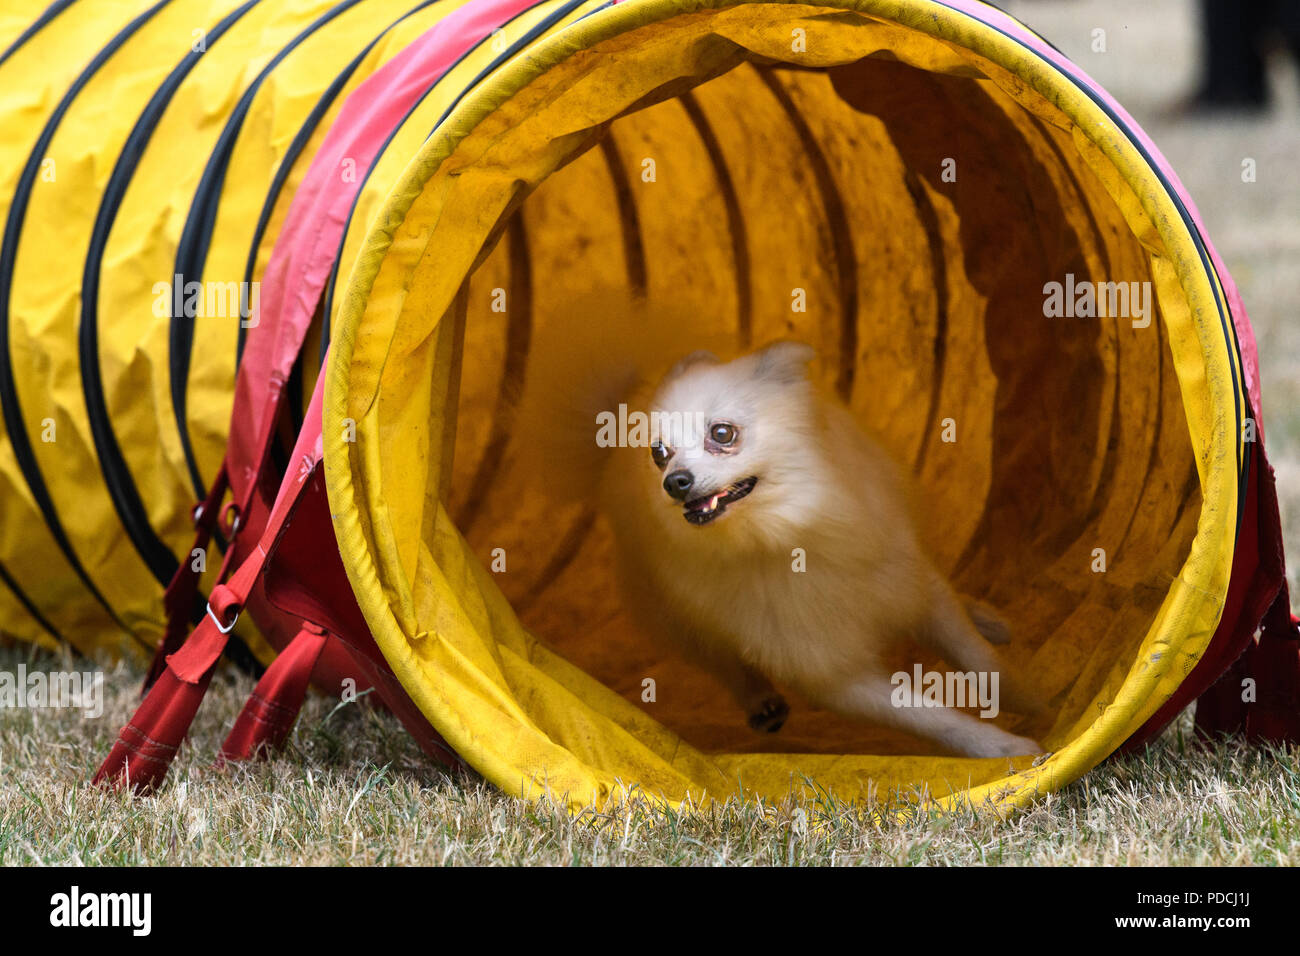 Rockingham Castle, Corby, England. 9th August 2018. With a look of keen concentration, a competing dog exits a tunnel successfully at the Kennel Club's international dog agility competition in the Great Park of Rockingham castle, Corby, England, on 9th August 2018. Credit: Michael Foley/Alamy Live News Stock Photo